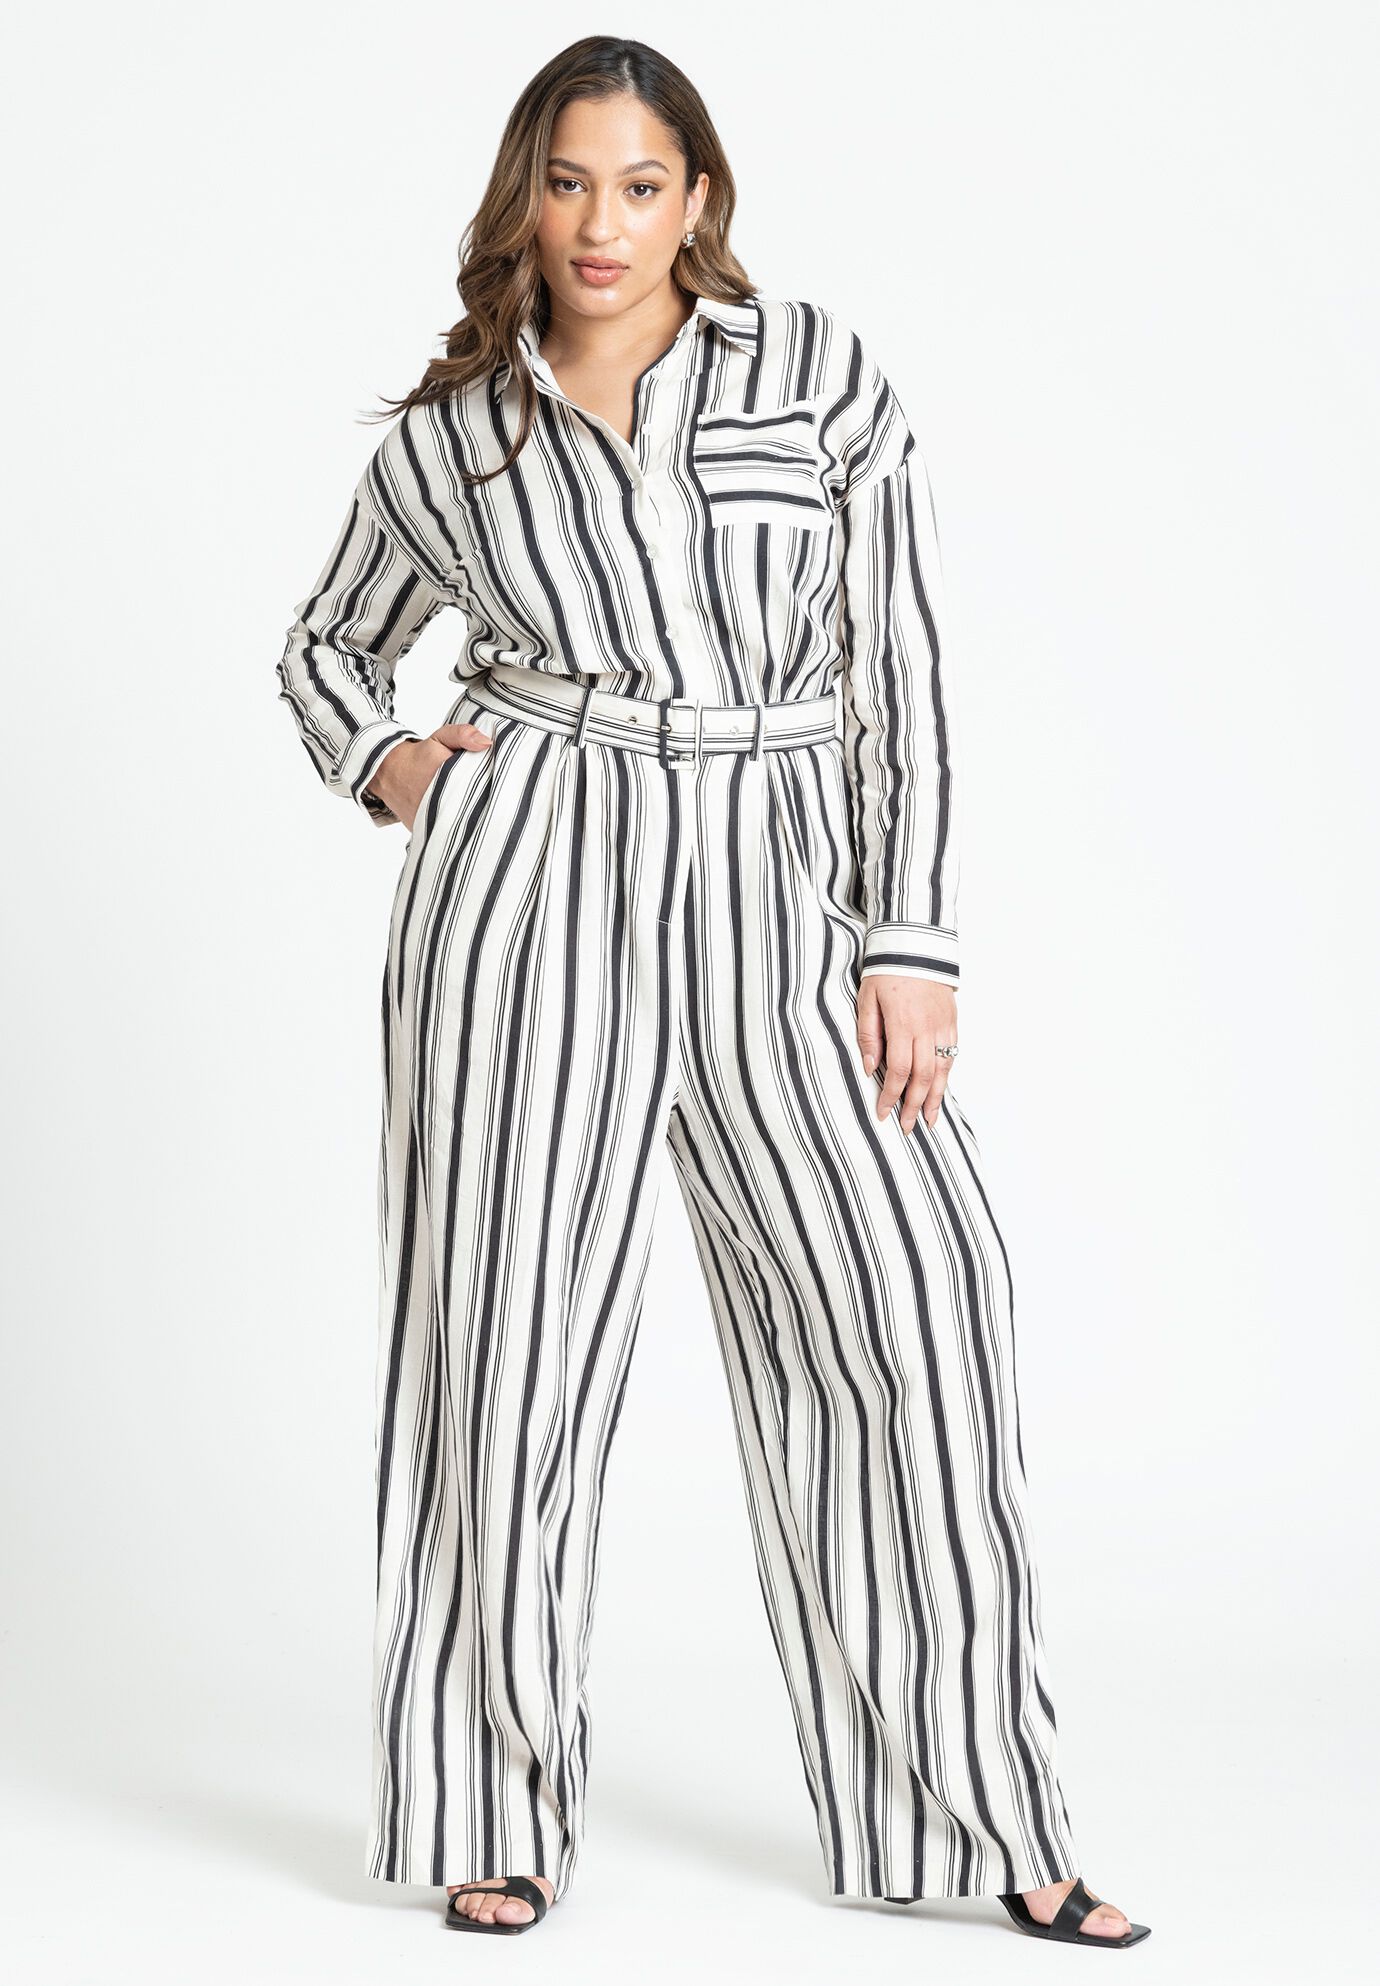 Plus Size Collared Long Sleeves Dropped Shoulder Belted Pocketed Pleated Floor Length Striped Print Jumpsuit